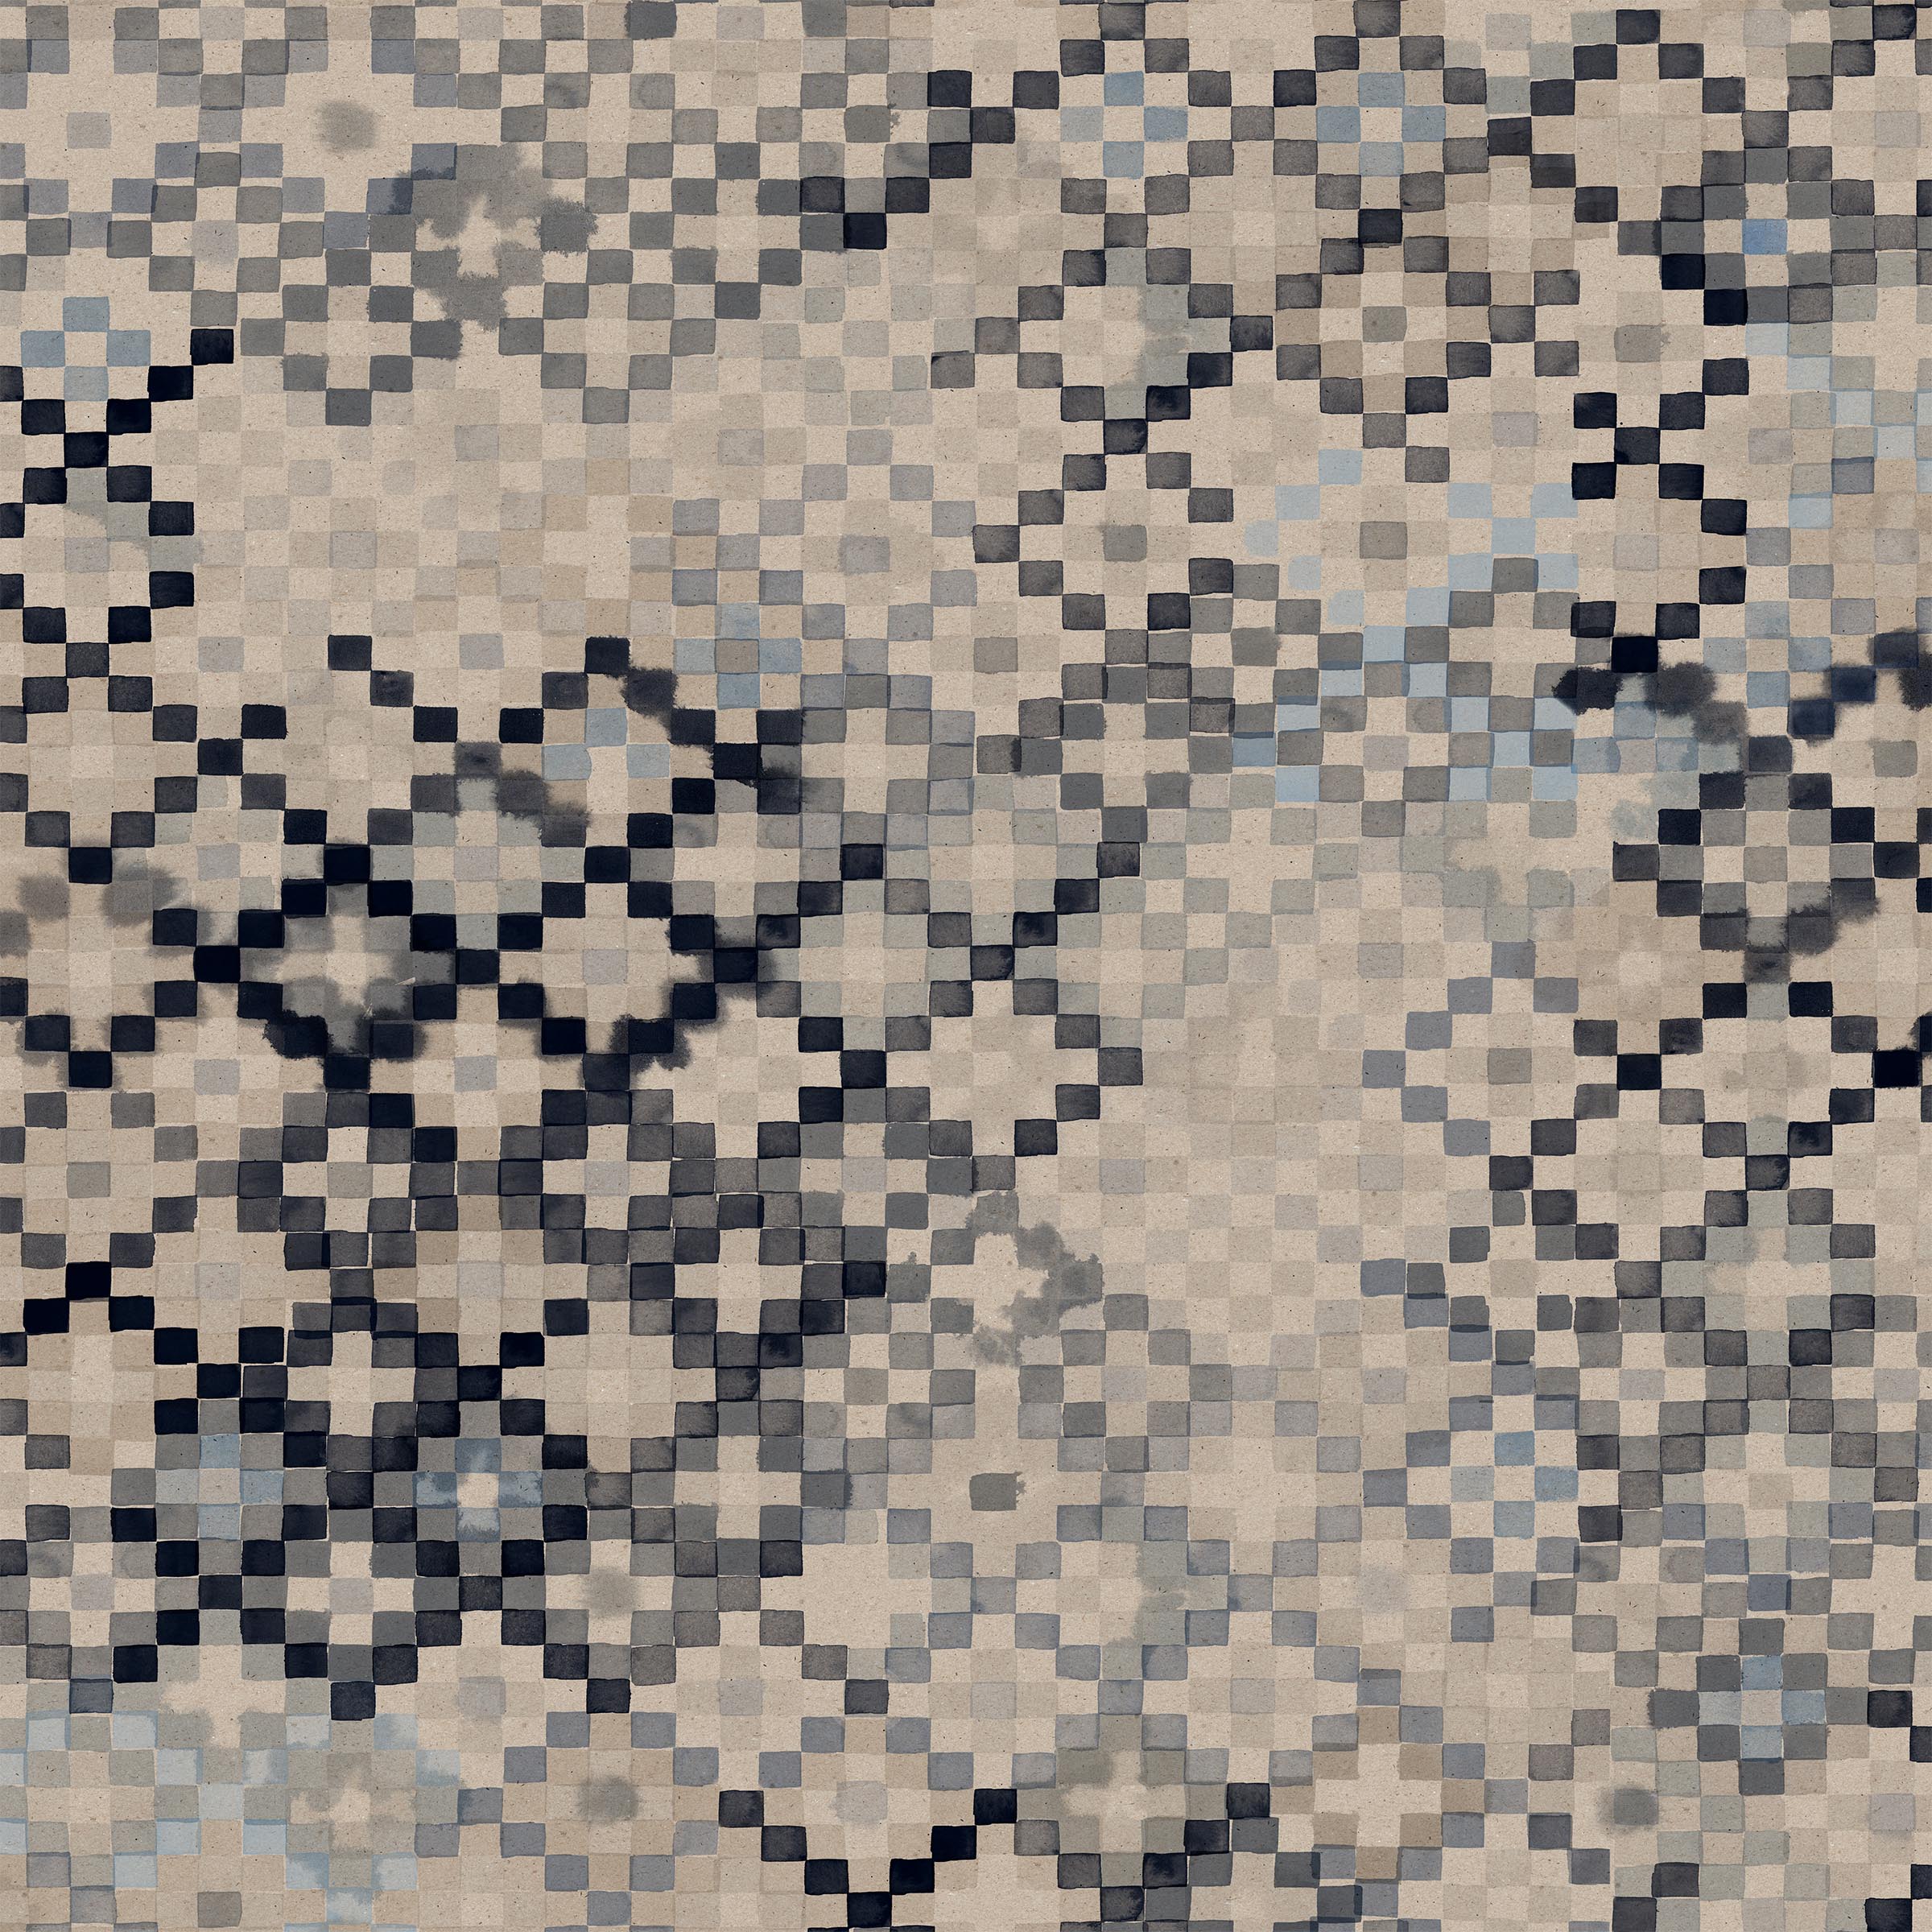 Detail of wallpaper in a diamond checked pattern in shades of cream, blue and gray.